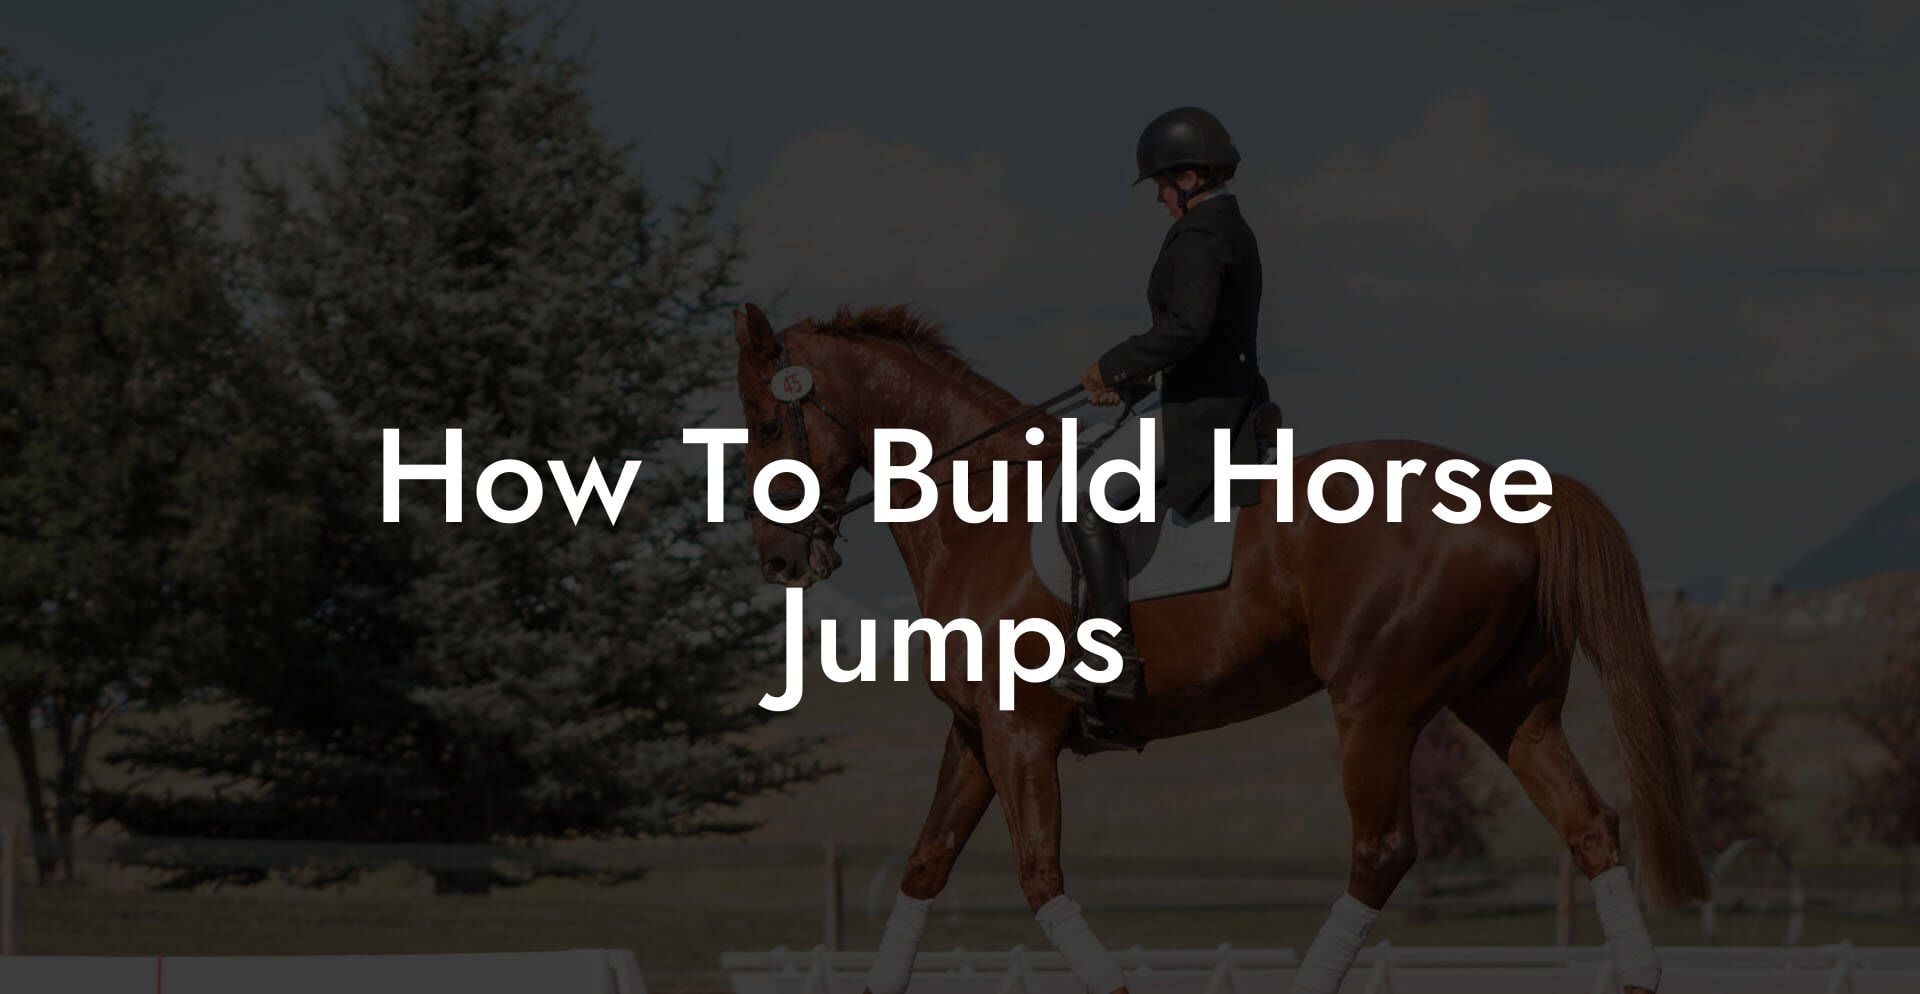 How To Build Horse Jumps